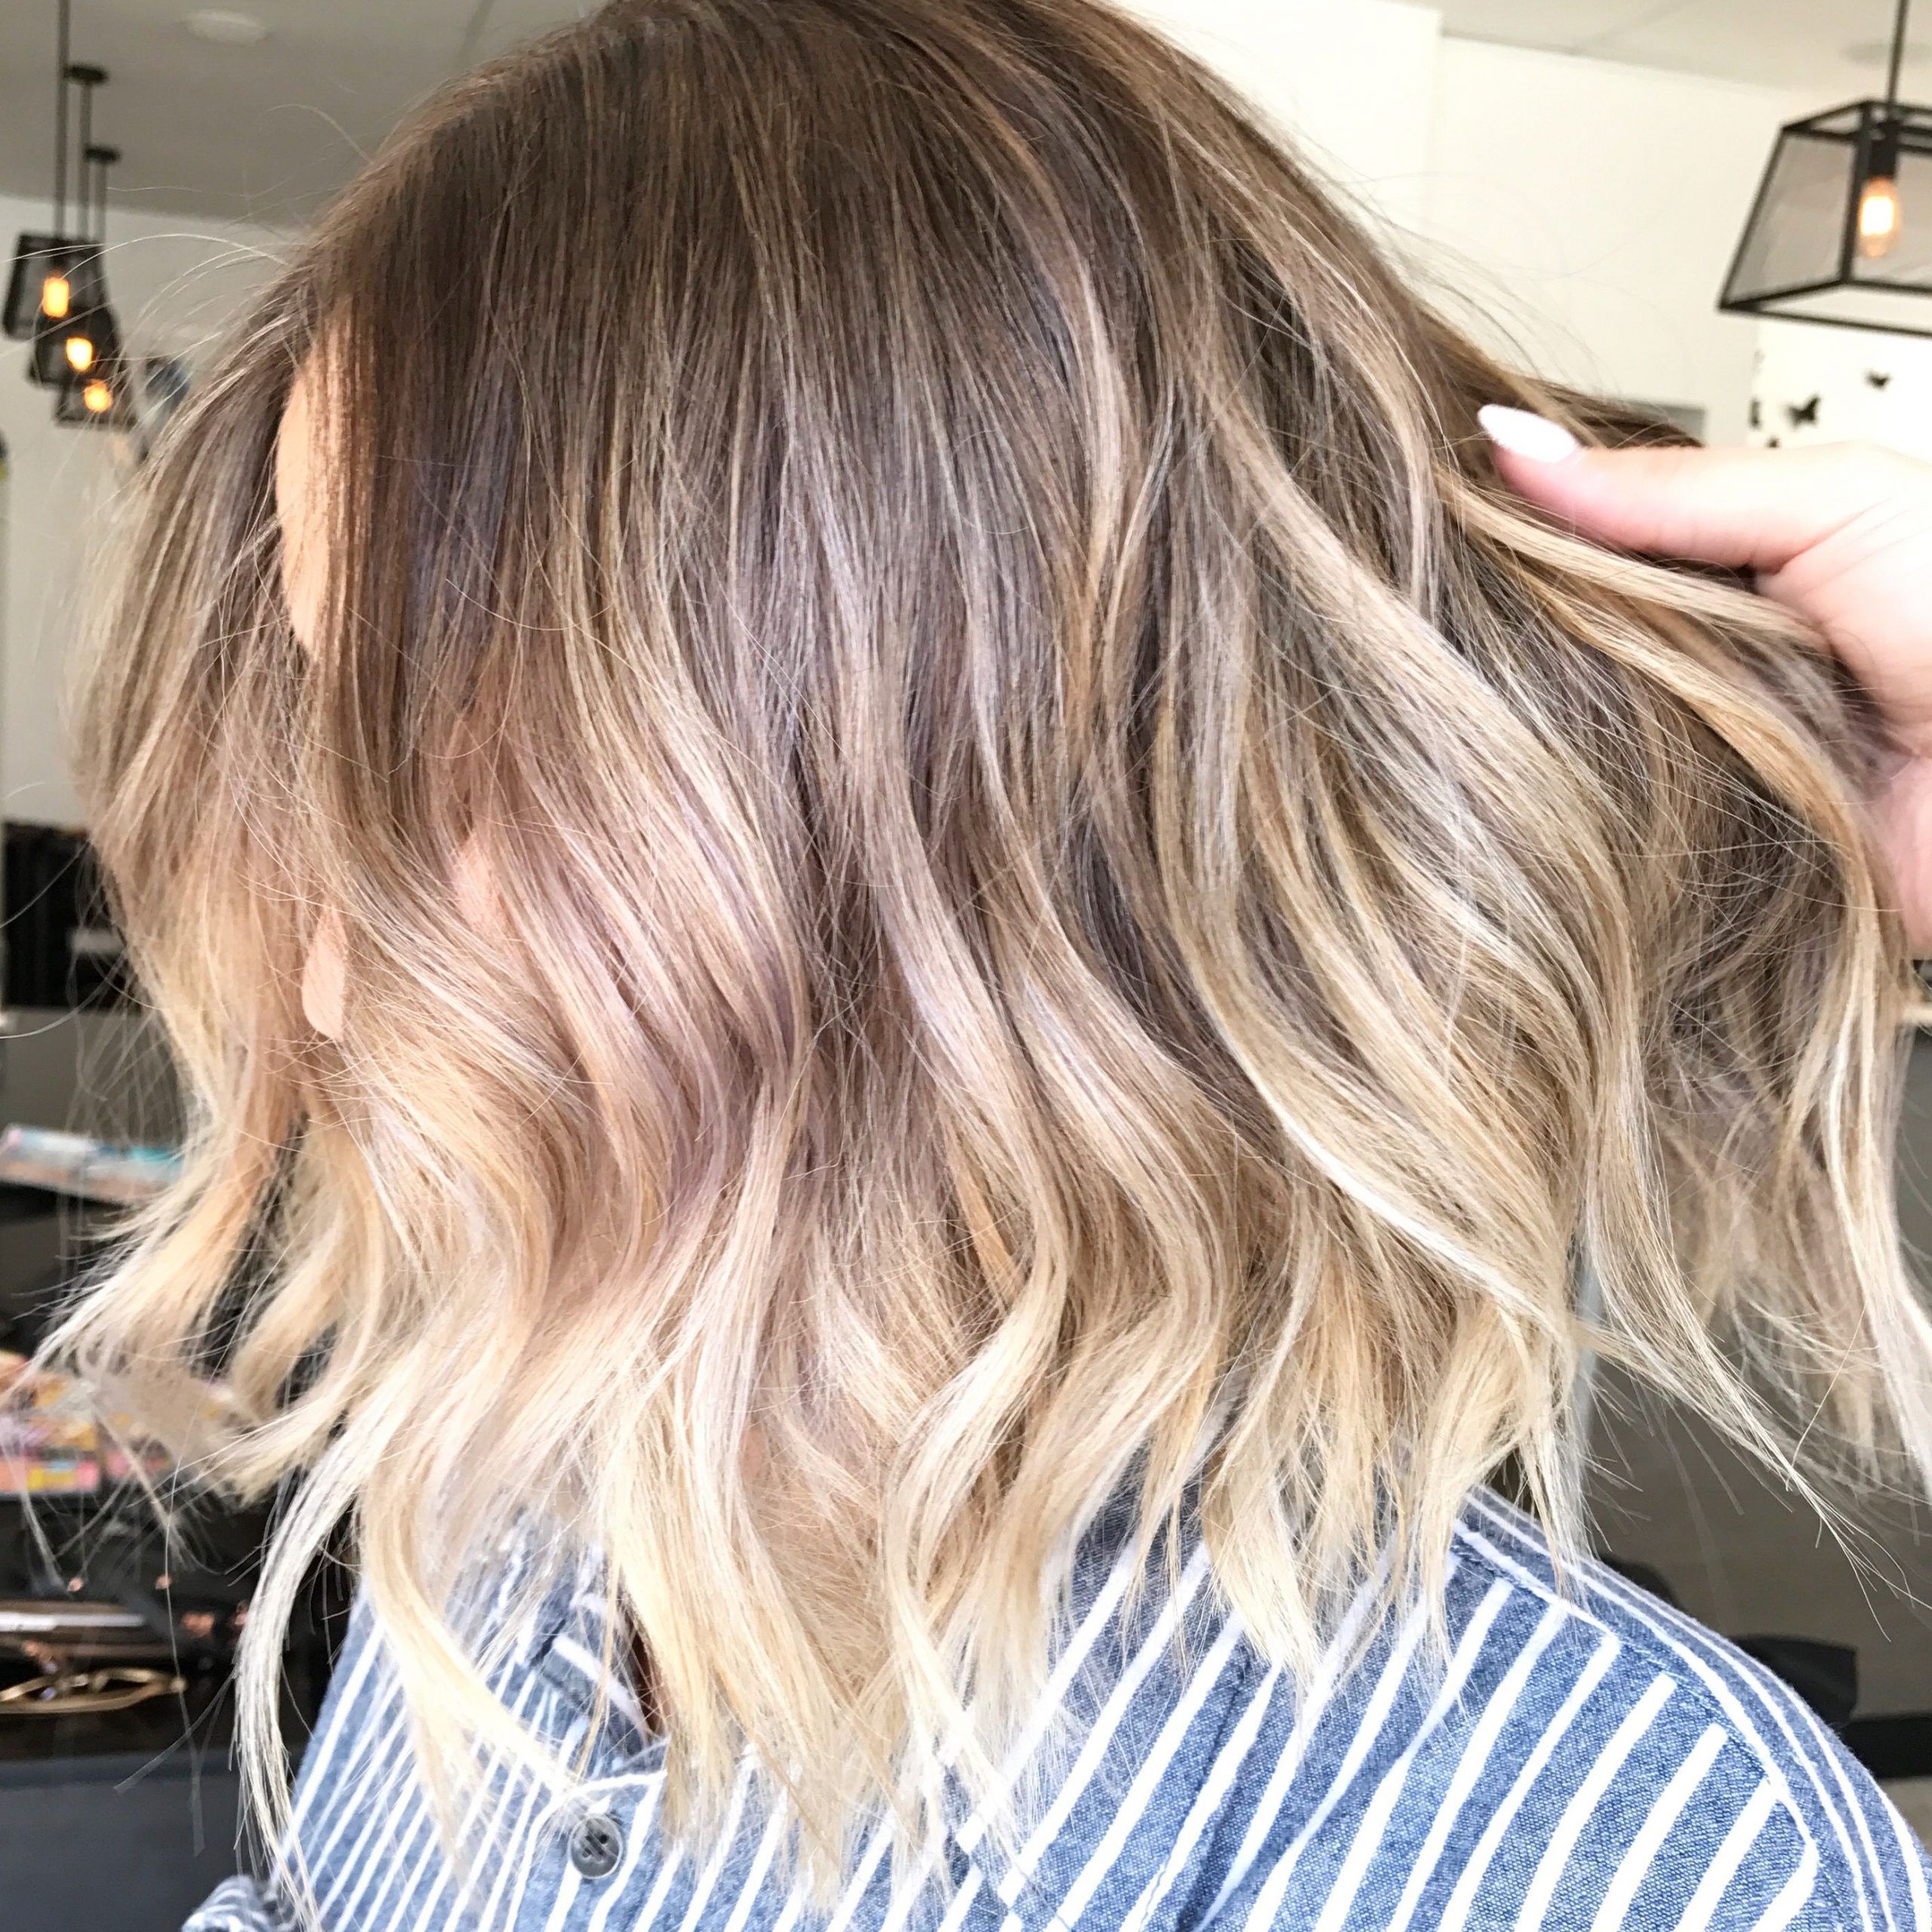 Most Recently Released Textured Bronde Bob Hairstyles With Silver Balayage With Regard To Blonde Balayage Short Lob Multidimensional Colour Lived In (View 8 of 20)